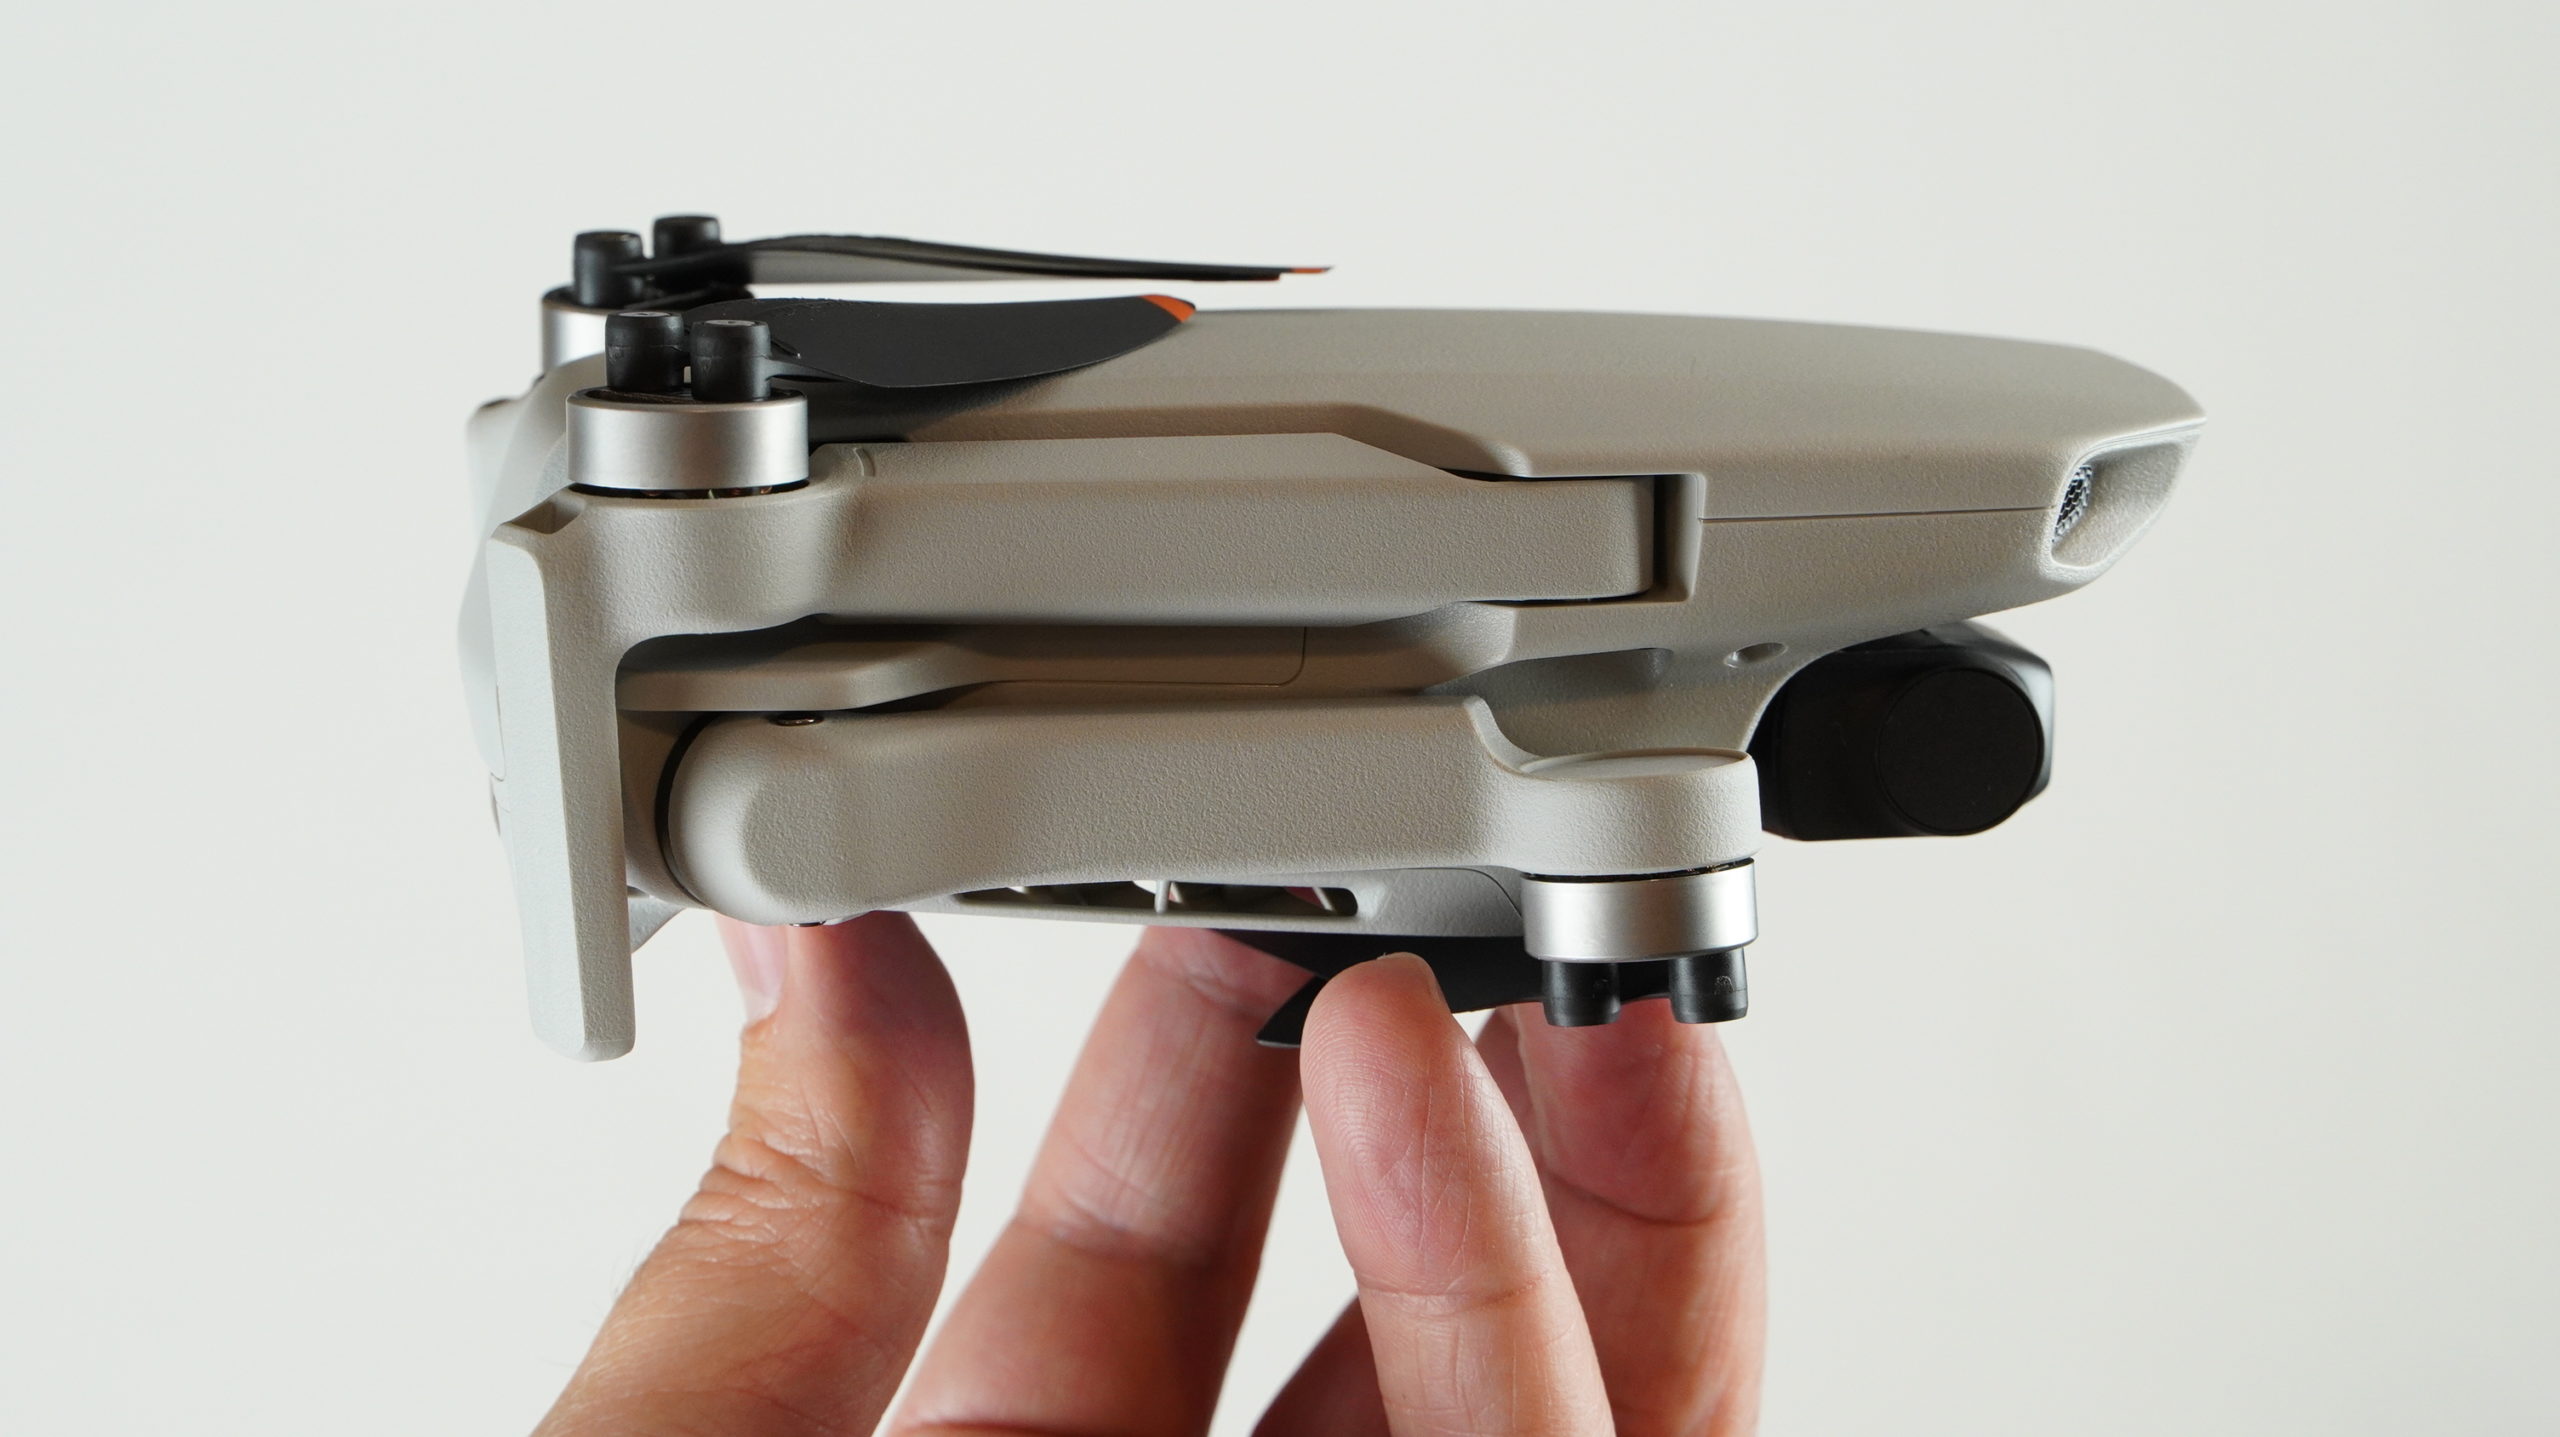 DJI Mini 2 Drone  Hands-on Review 